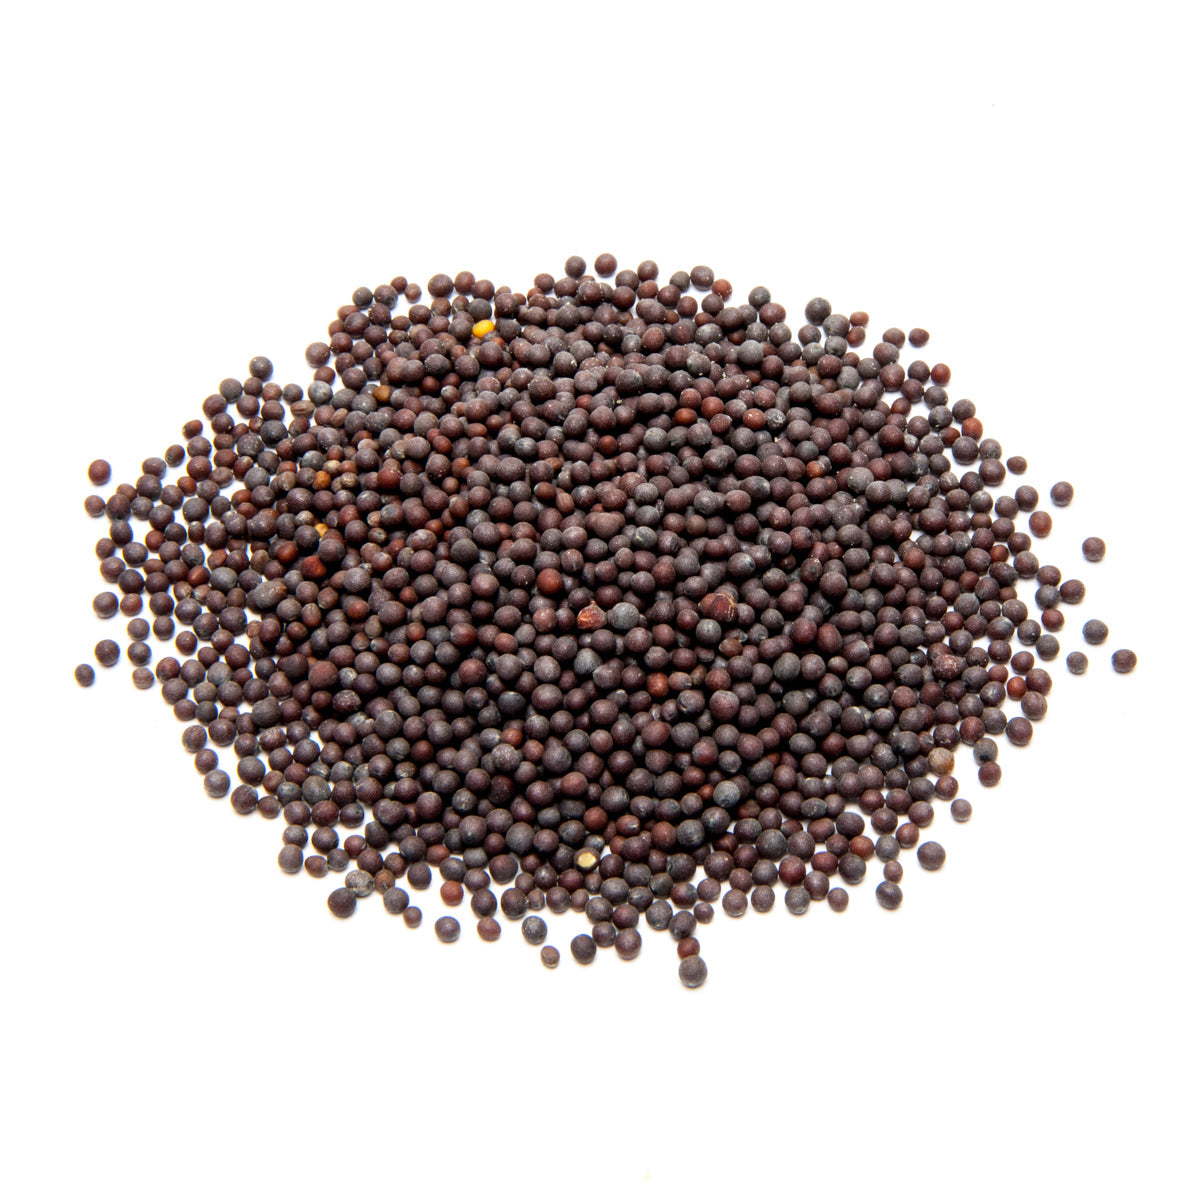 Spice-Mustard Seeds Brown (Whole)